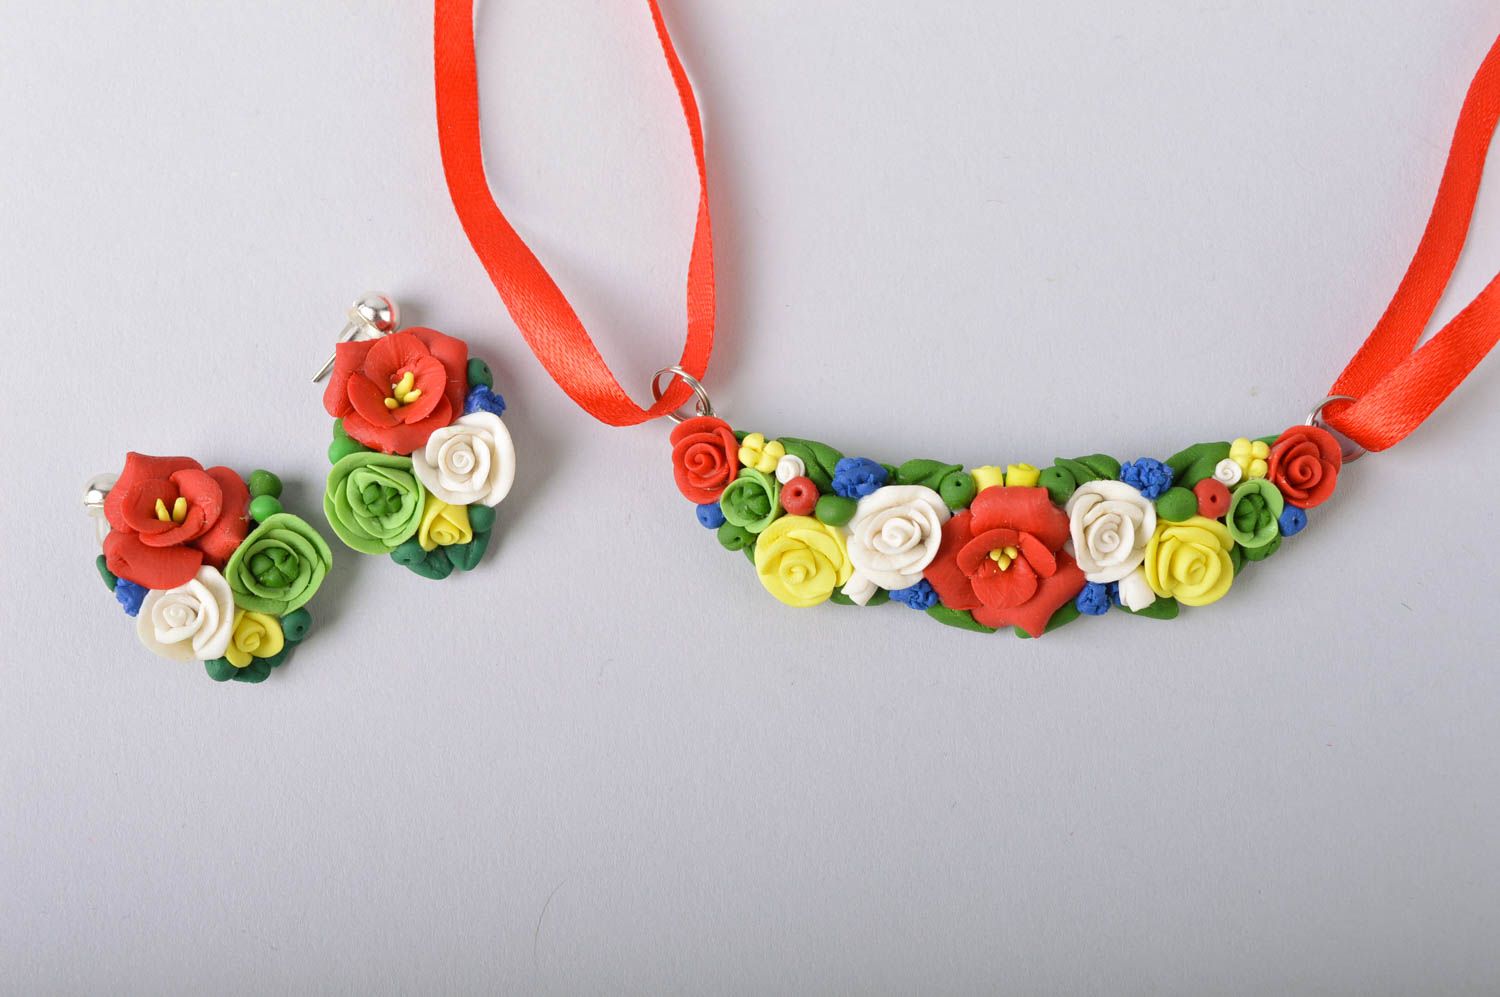 Handmade colorful floral cold porcelain jewelry set earrings and necklace photo 3